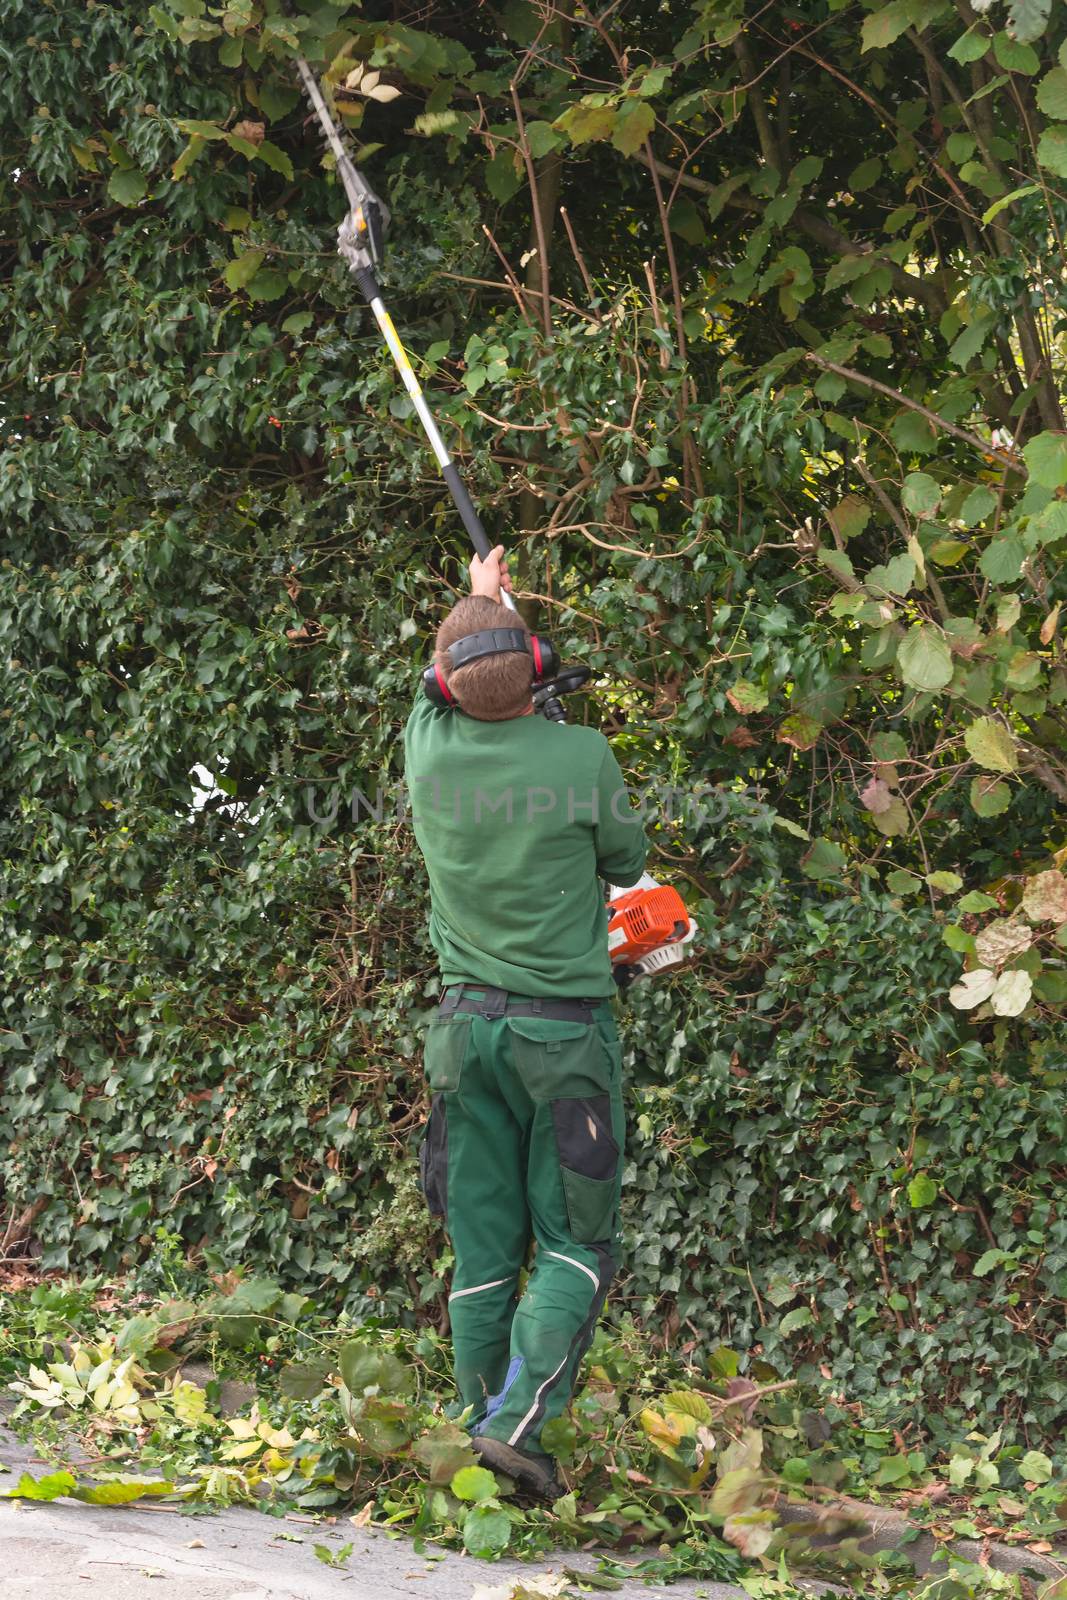 Panoramic image from cutting a hedge      by JFsPic